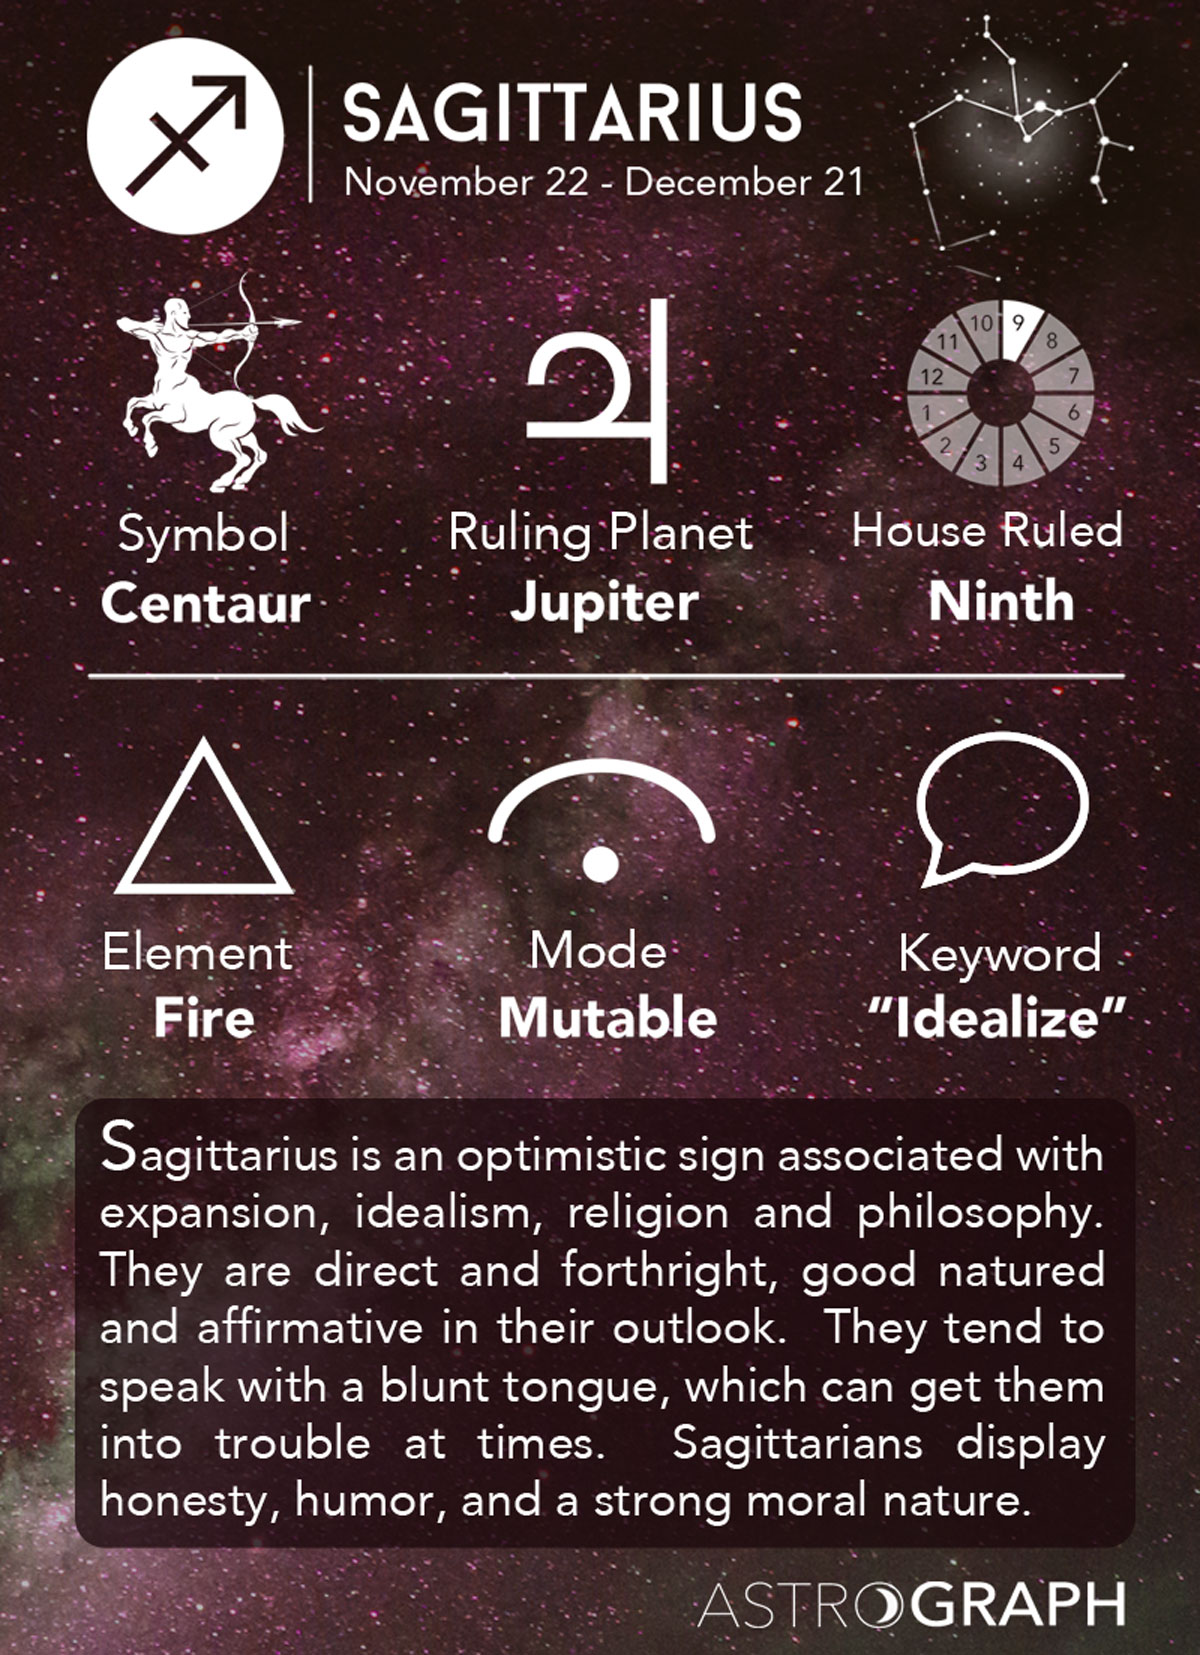 What is Sagittarius famous for?